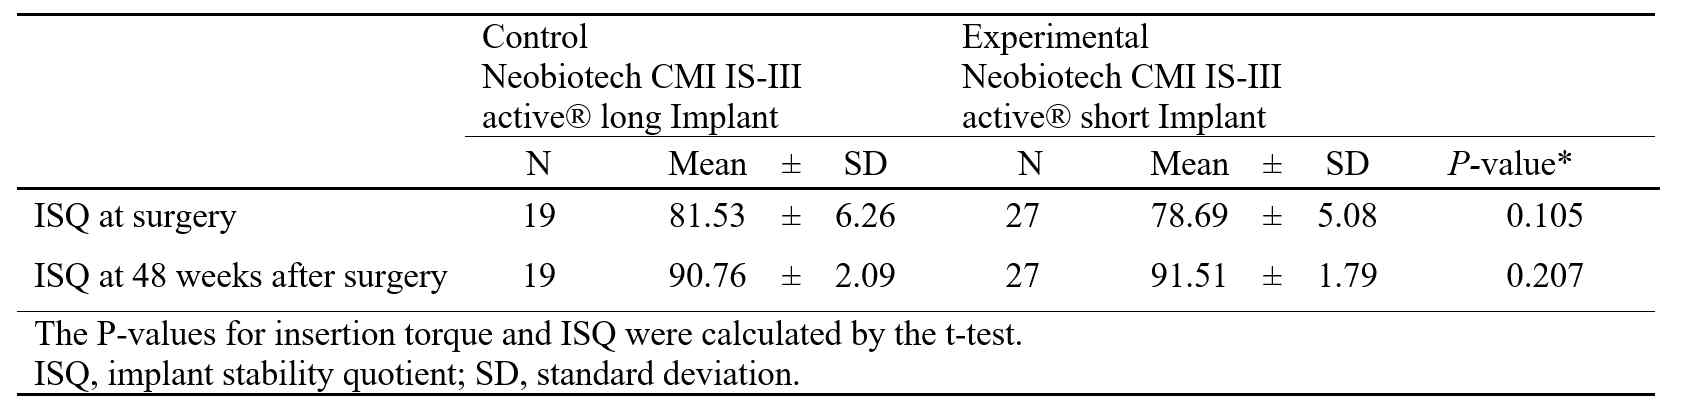 Comparison of ISQ value at 48 weeks after surgery between the long and short implants